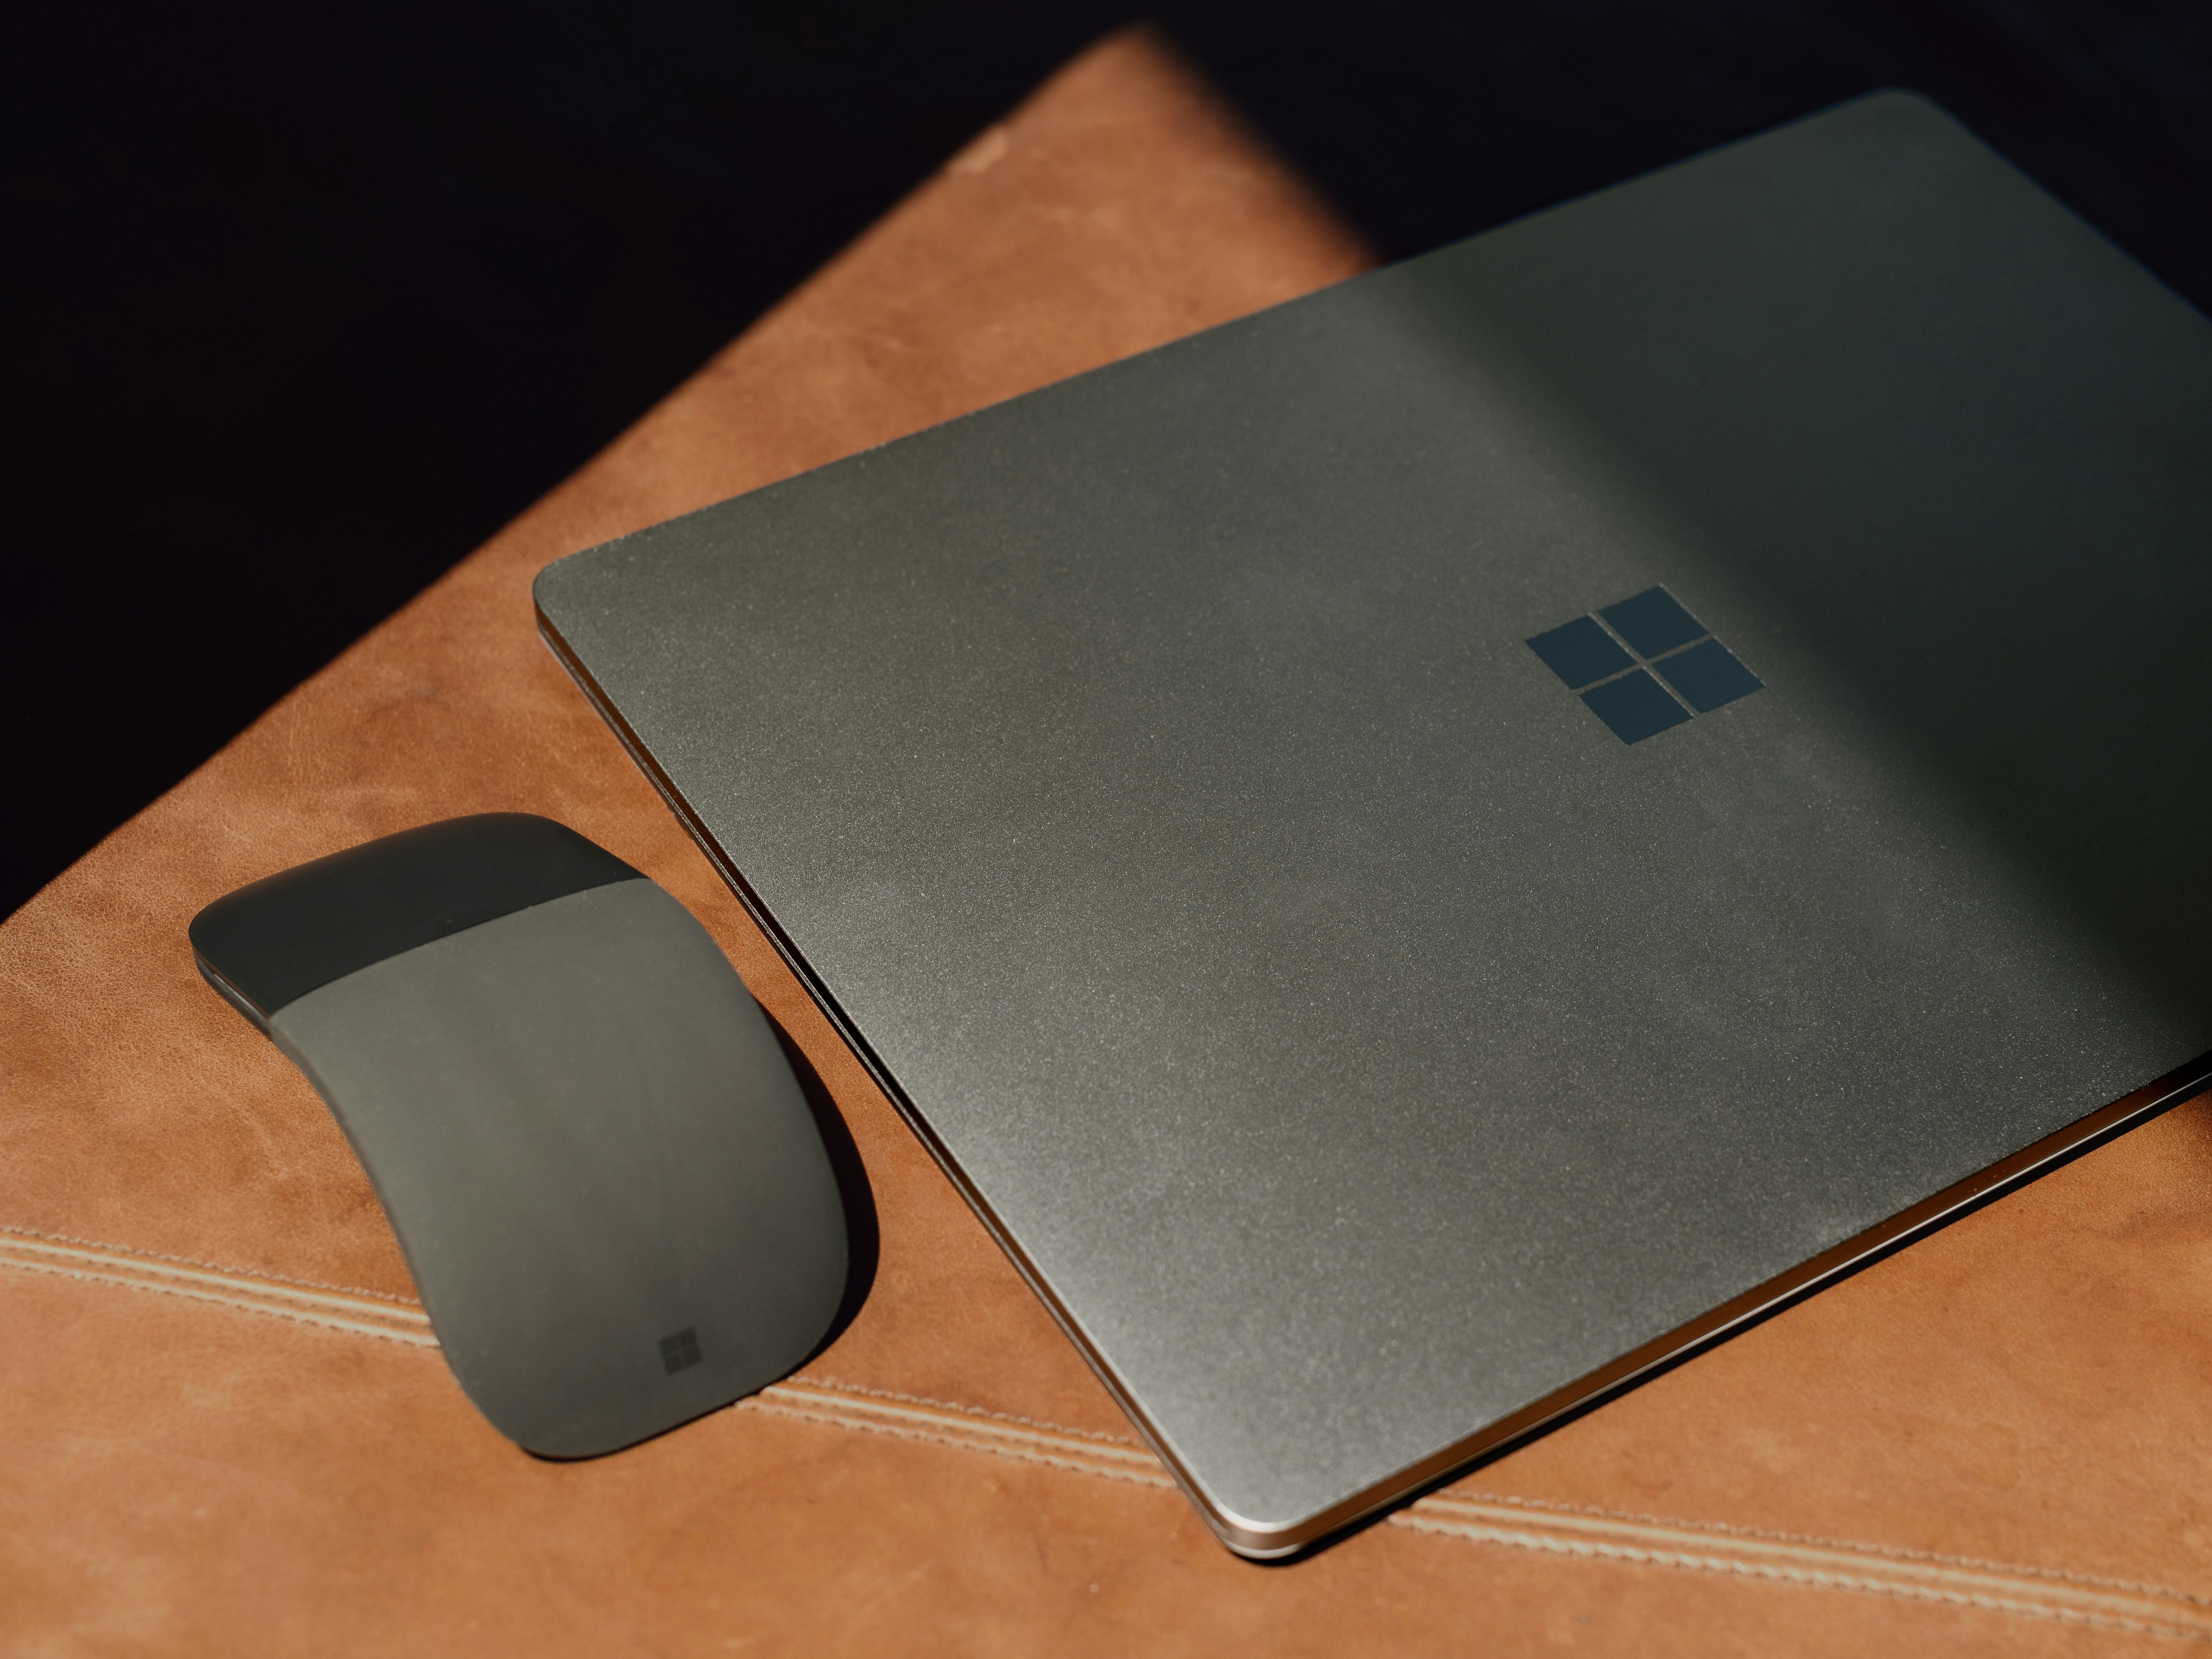 Surface and mouse on brown wooden table